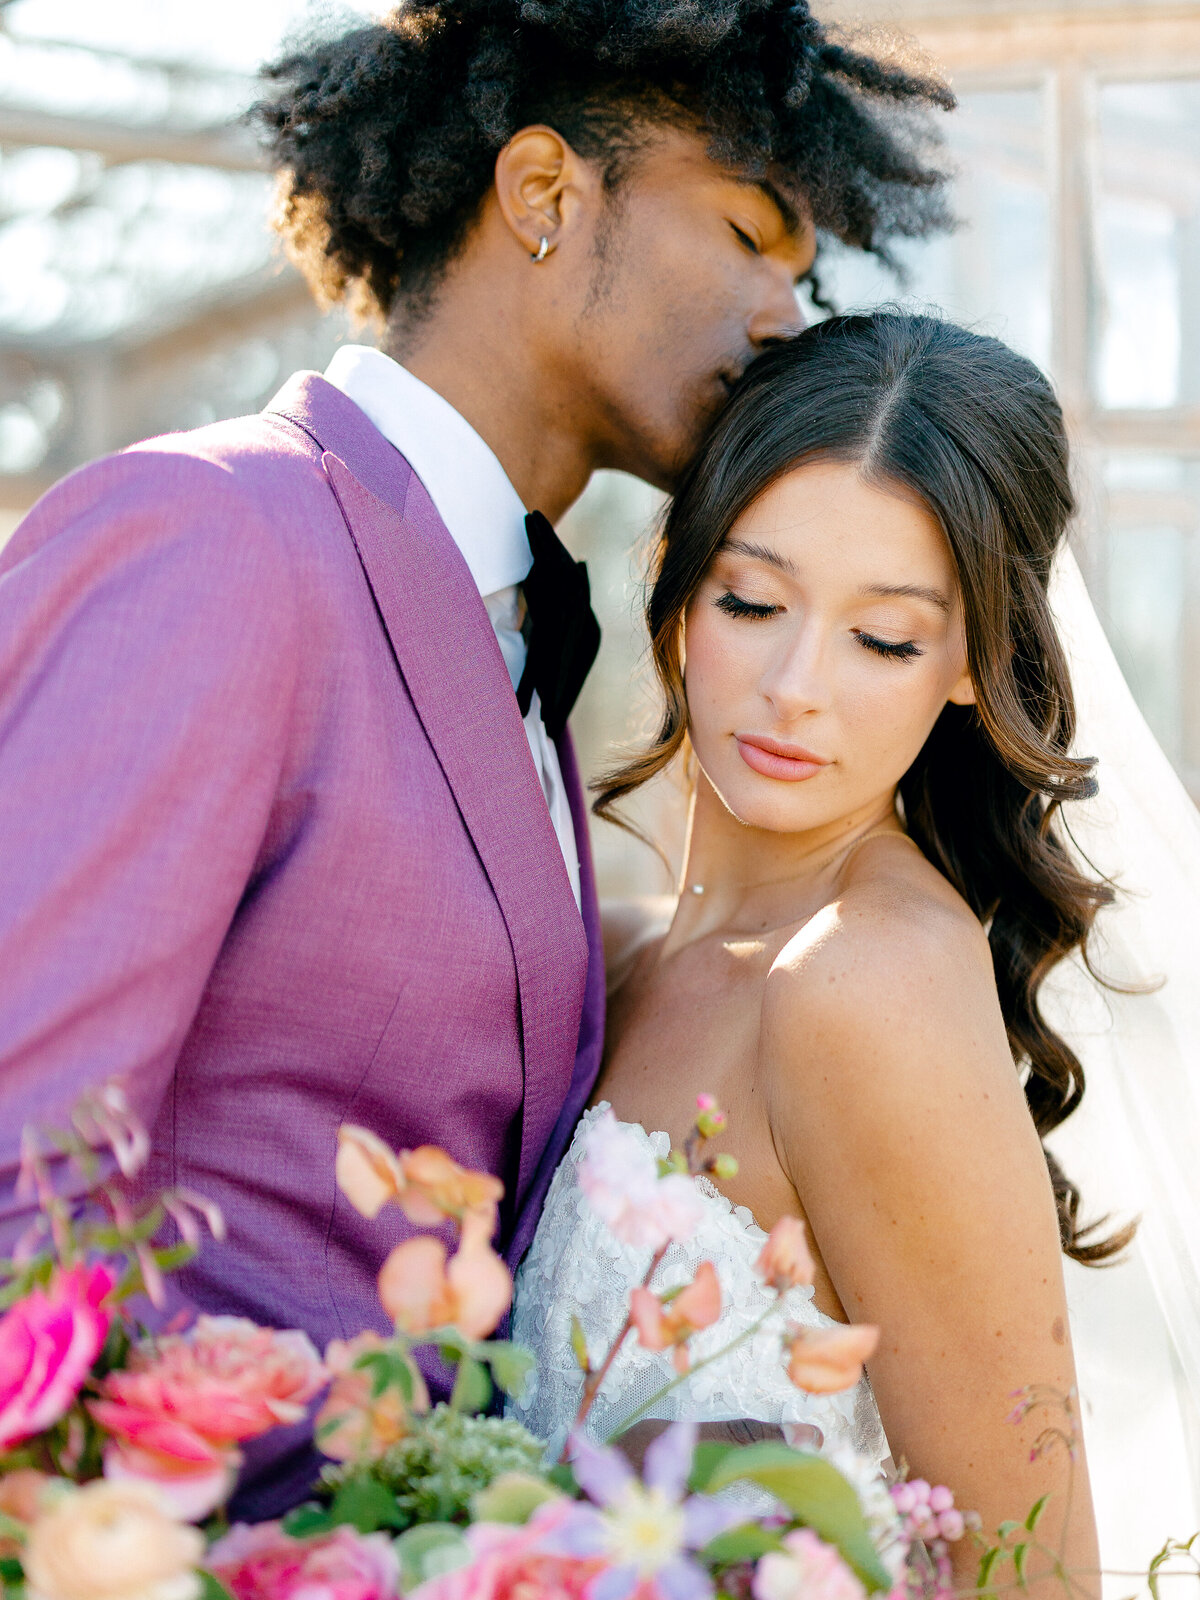 Groom in purple suit kissing bride on the head while she looks down